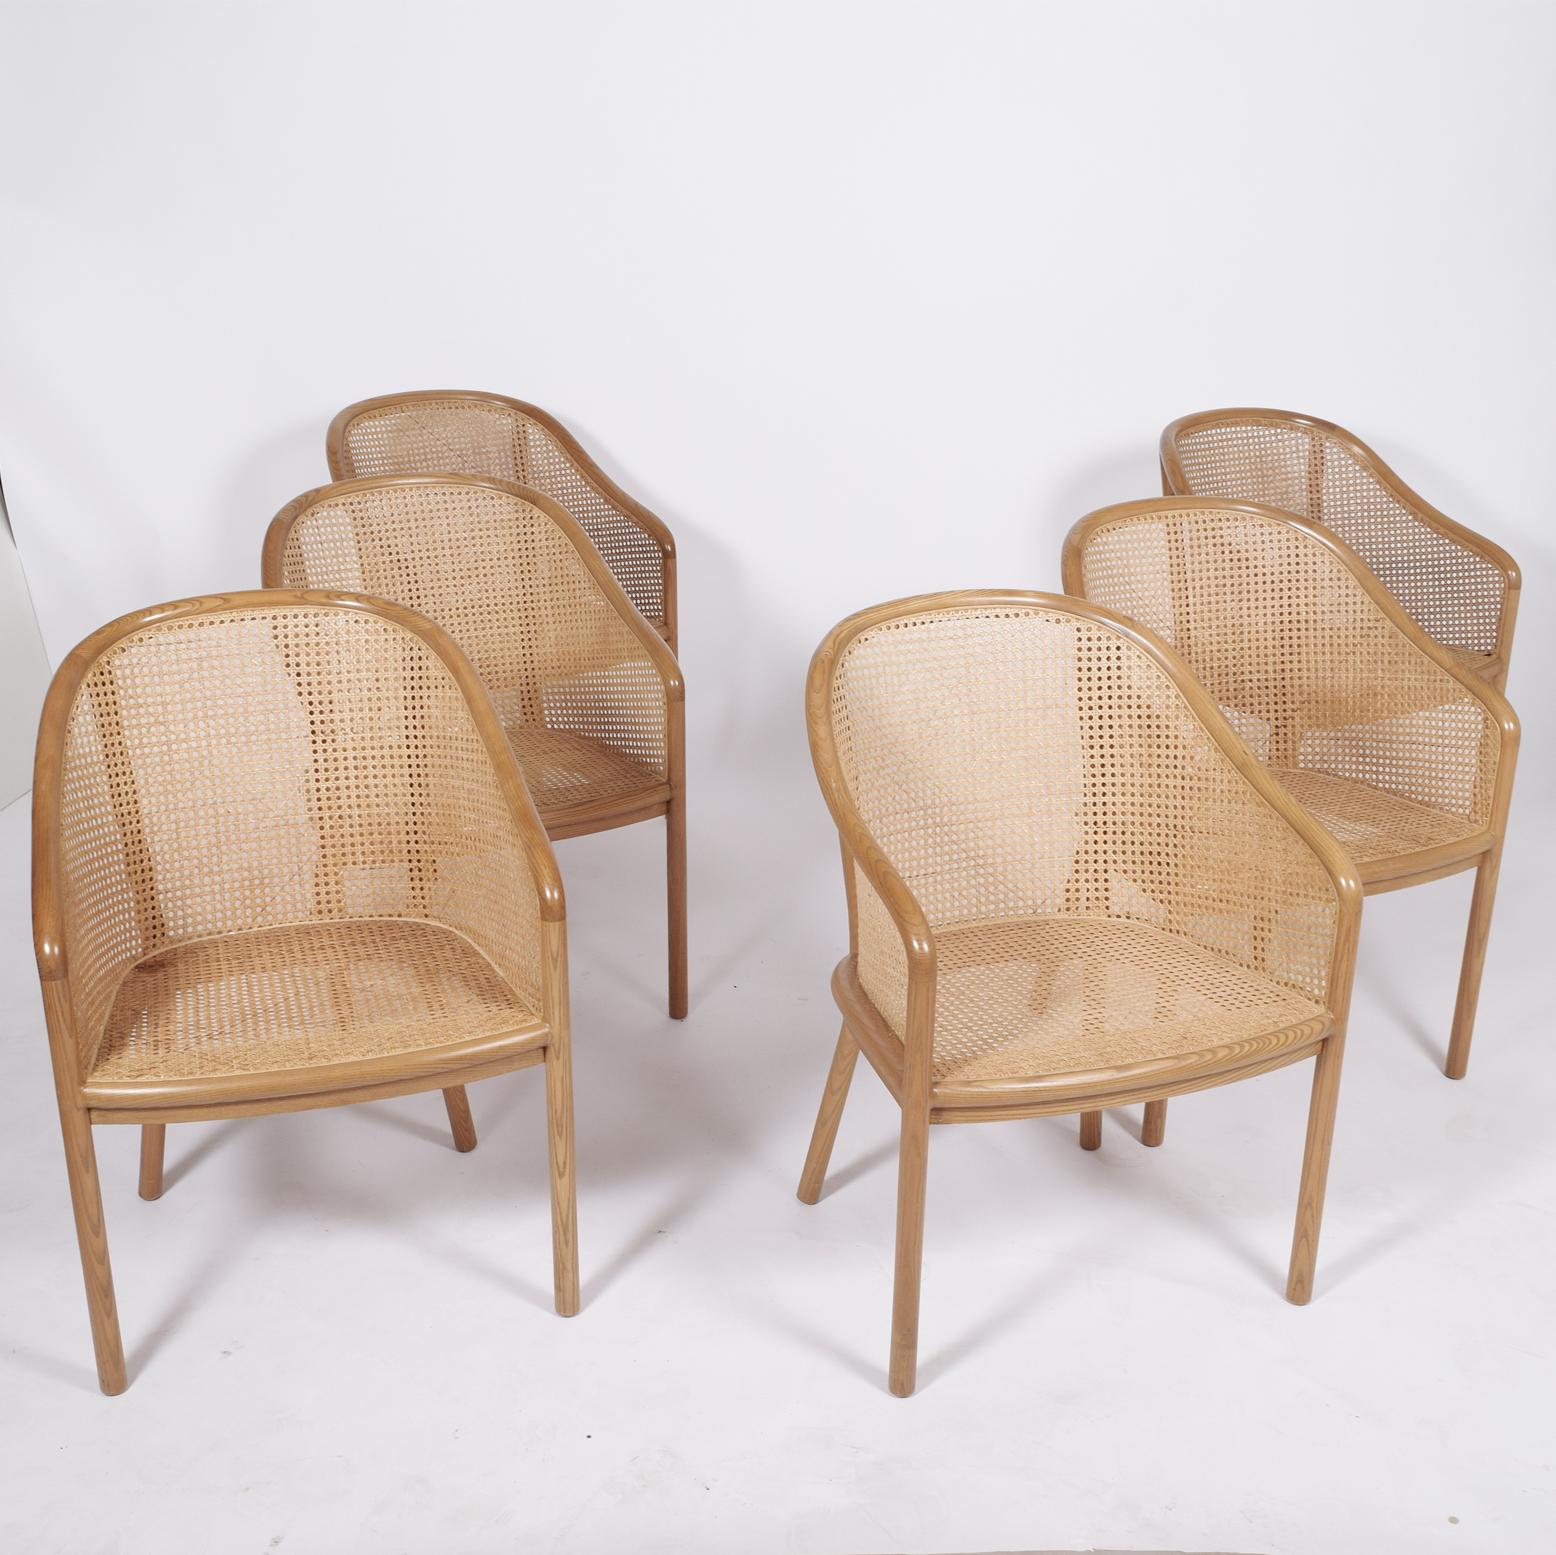 Mid-20th Century Six Ward Bennet Armchairs for Brickel Assoc. Design 1960s